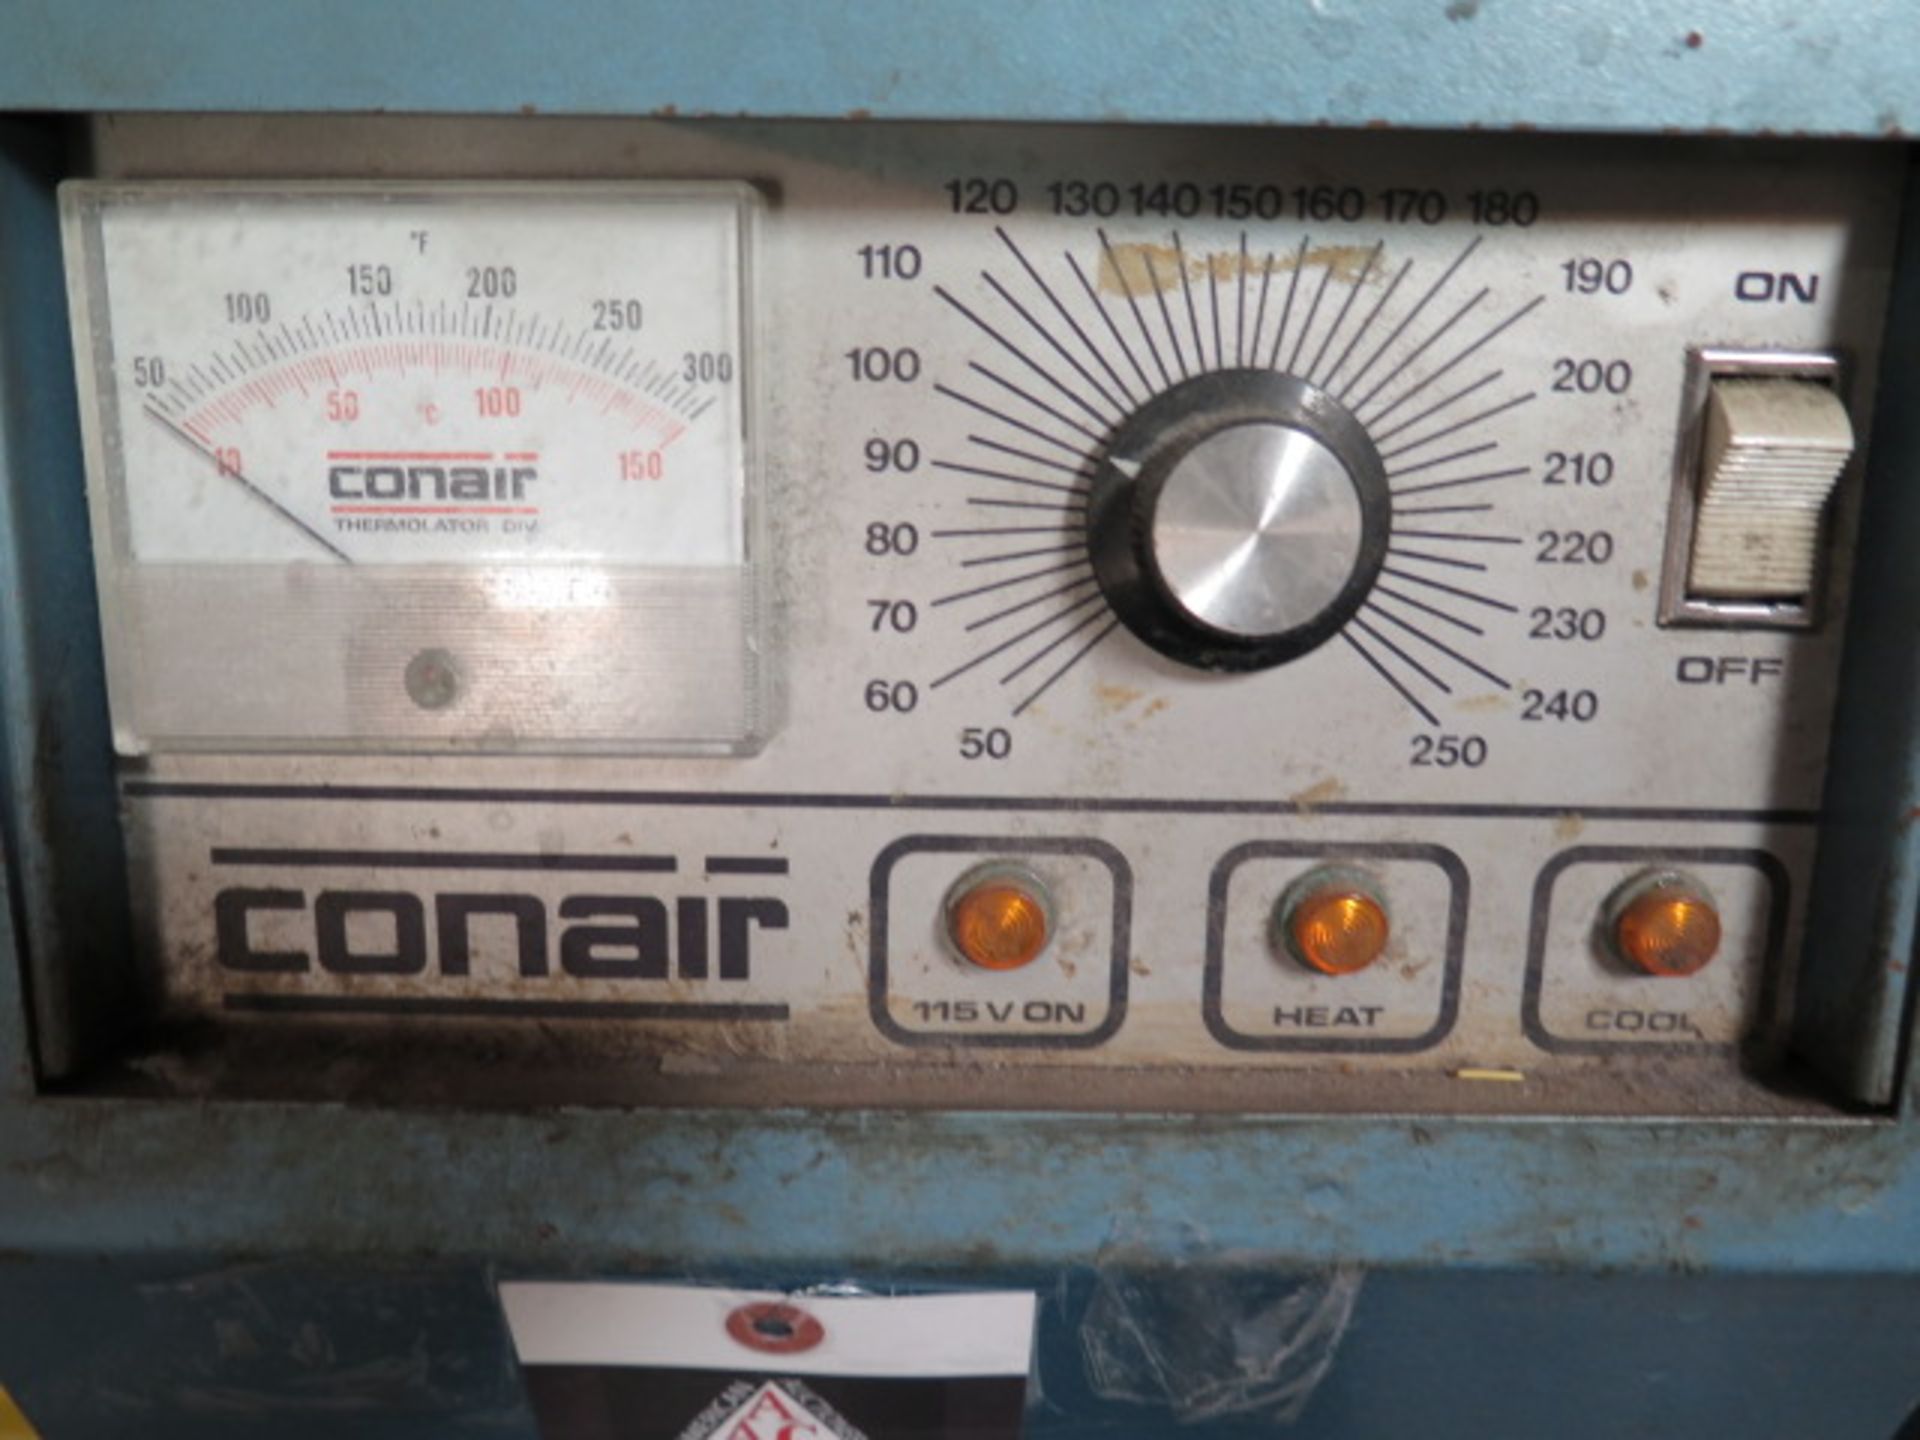 Conair 340-522-01 Temperature Controller s/n 1-0279 (SOLD AS-IS - NO WARRANTY) (Item Located at 830 - Image 5 of 6